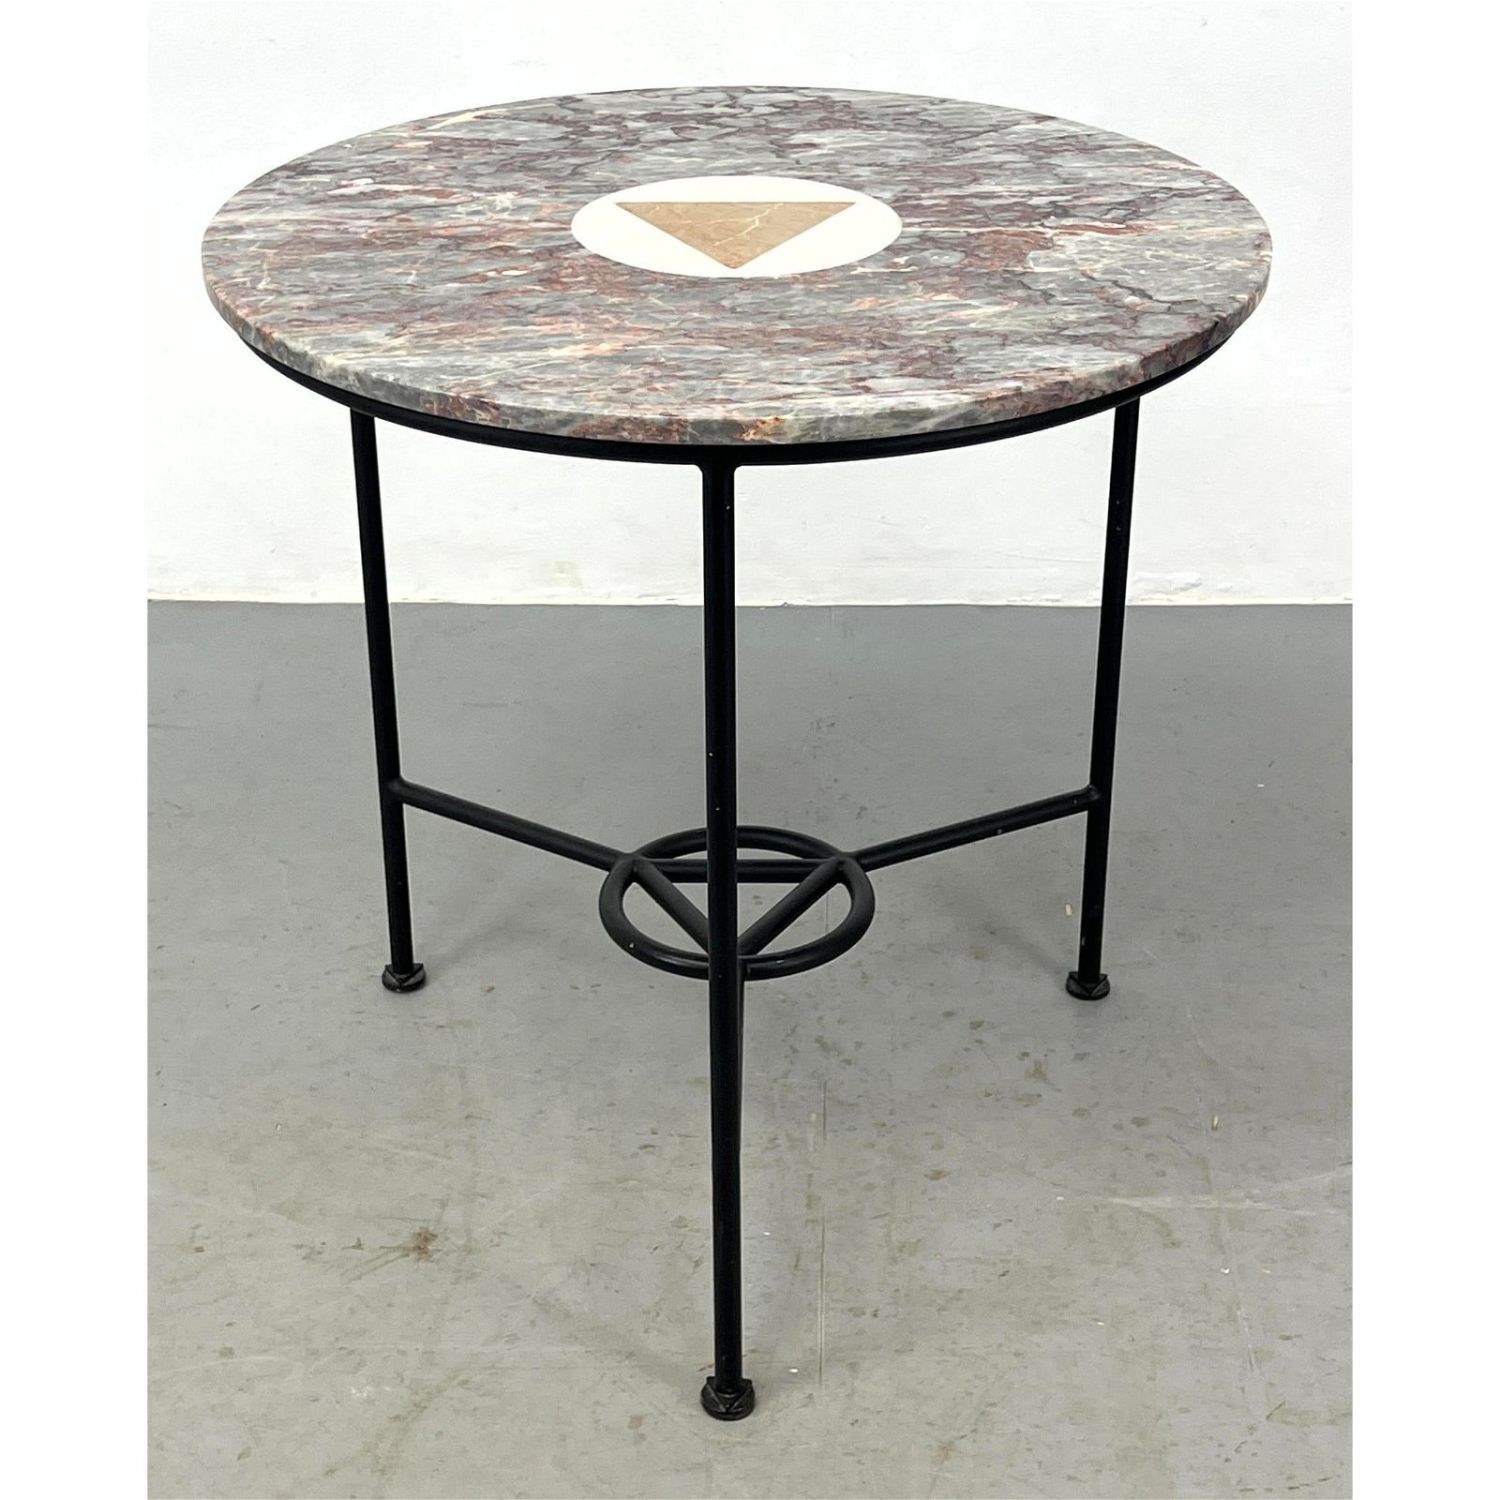 Inlaid Colored Marble Top Modernist